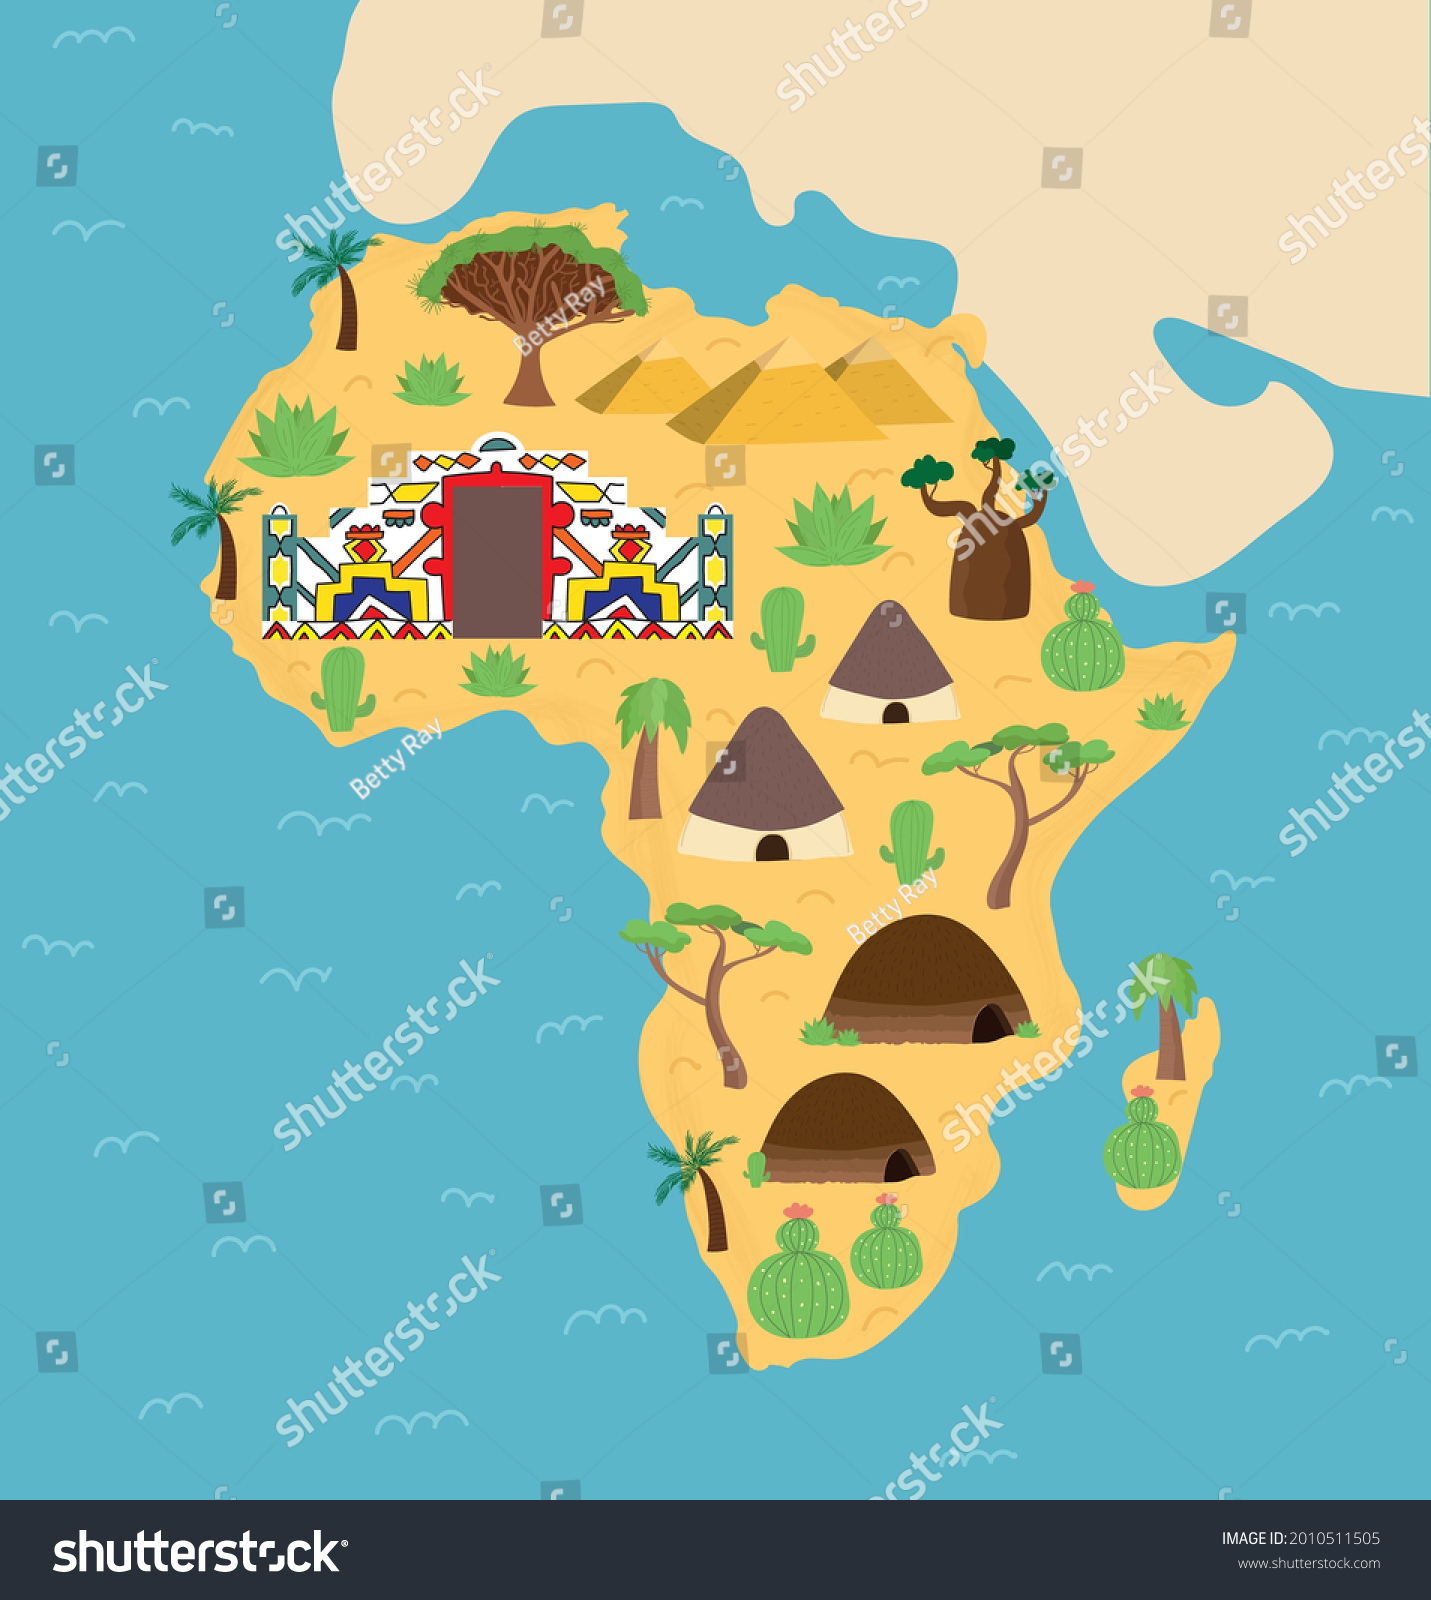 Cartoon Hand Drawn Illustrated Map Africa Stock Vector Royalty Free 2010511505 Shutterstock 9150